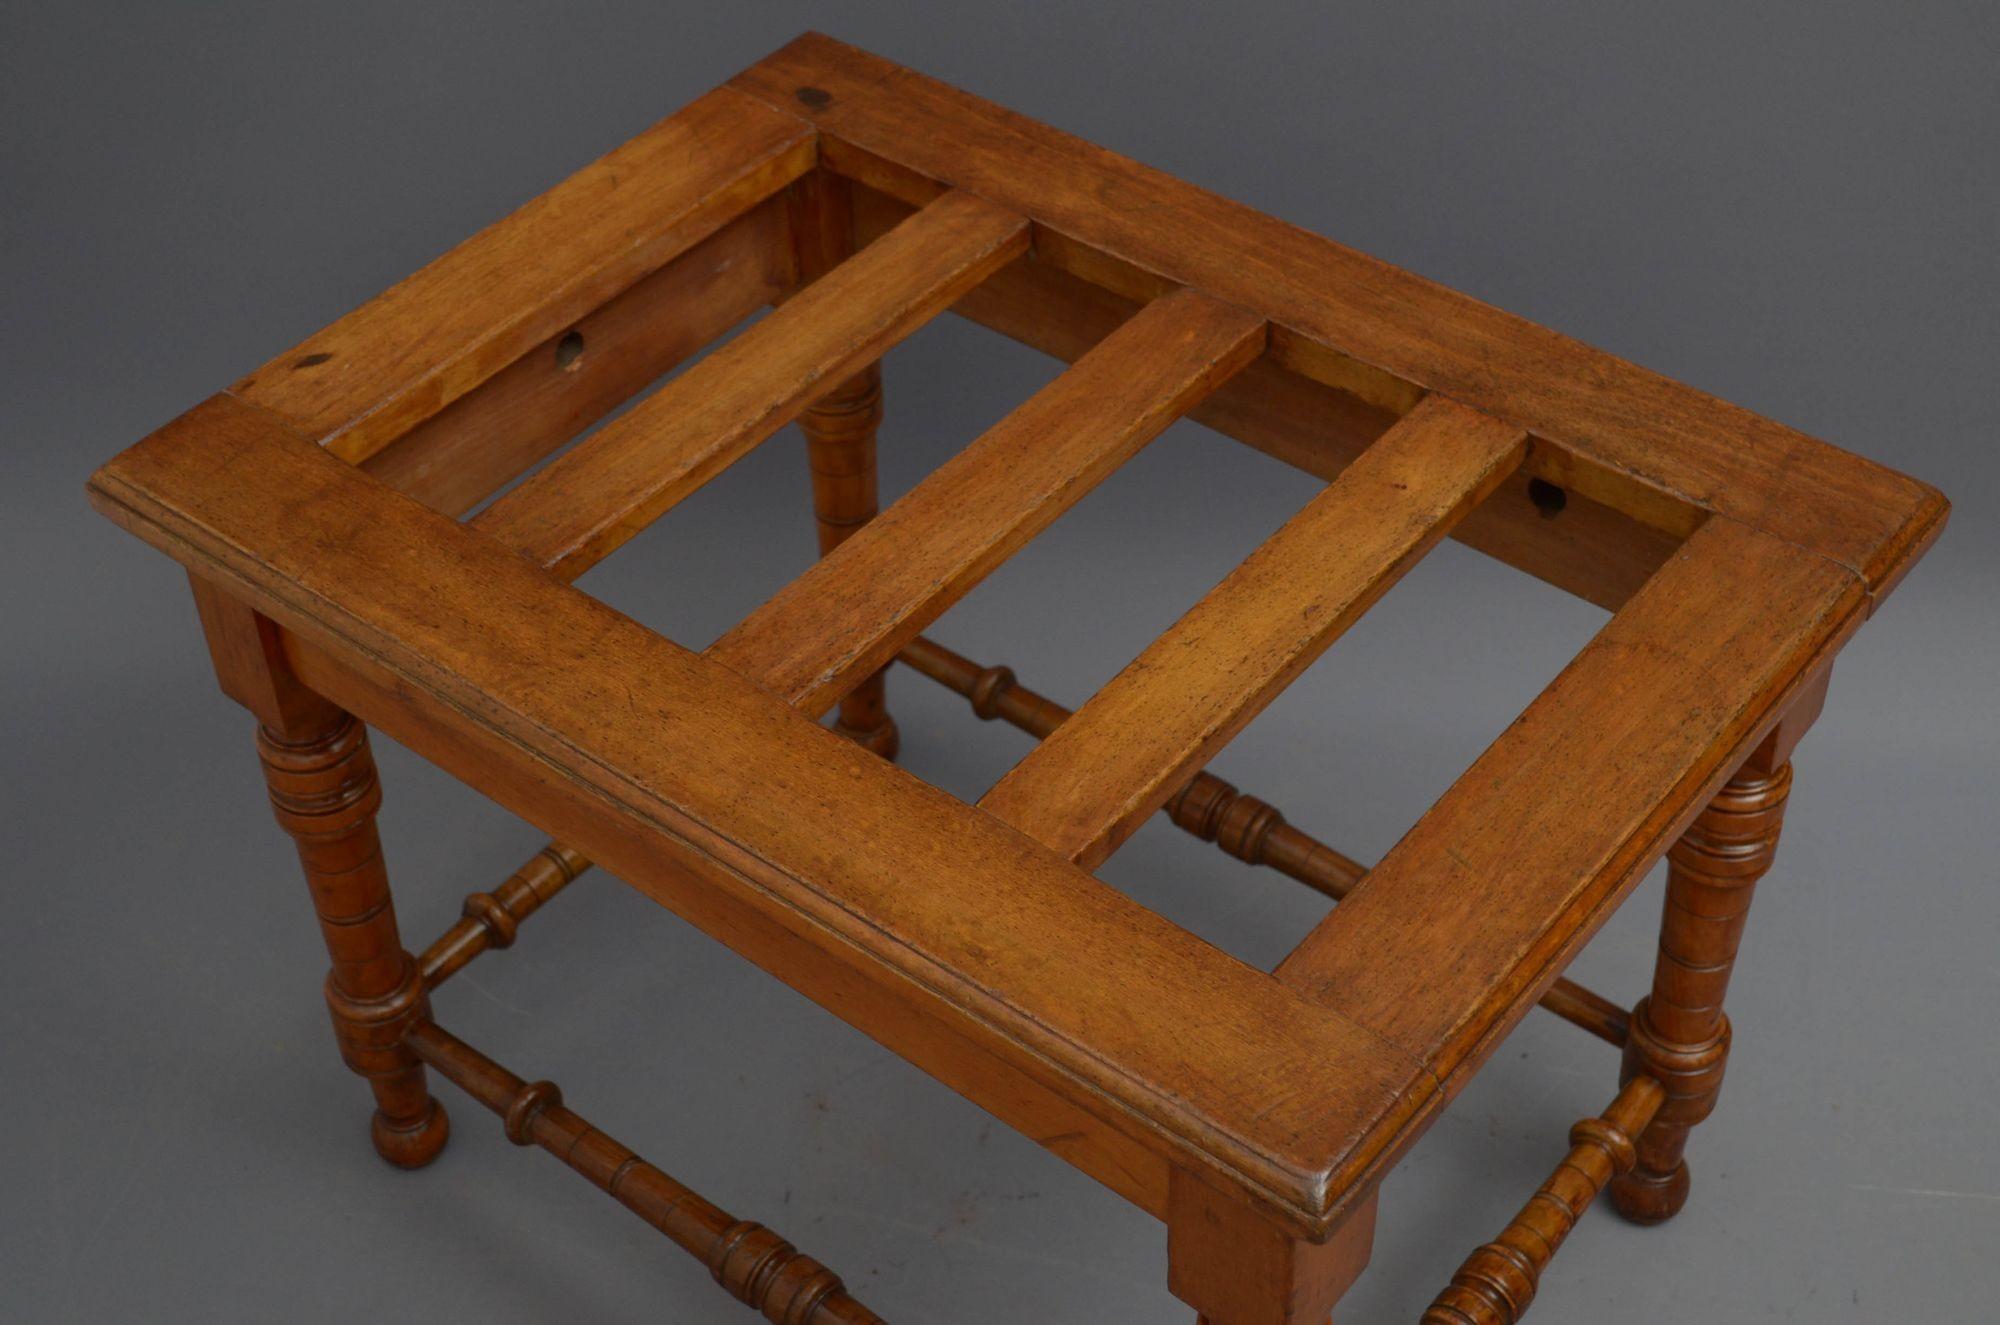 Sn5456 Unusual Victorian satinwood luggage rack with slatted, oversailing top, shallow frieze and four turned and ringed legs united by turned and ringed stretchers, all in home ready condition. c1880
H19.5